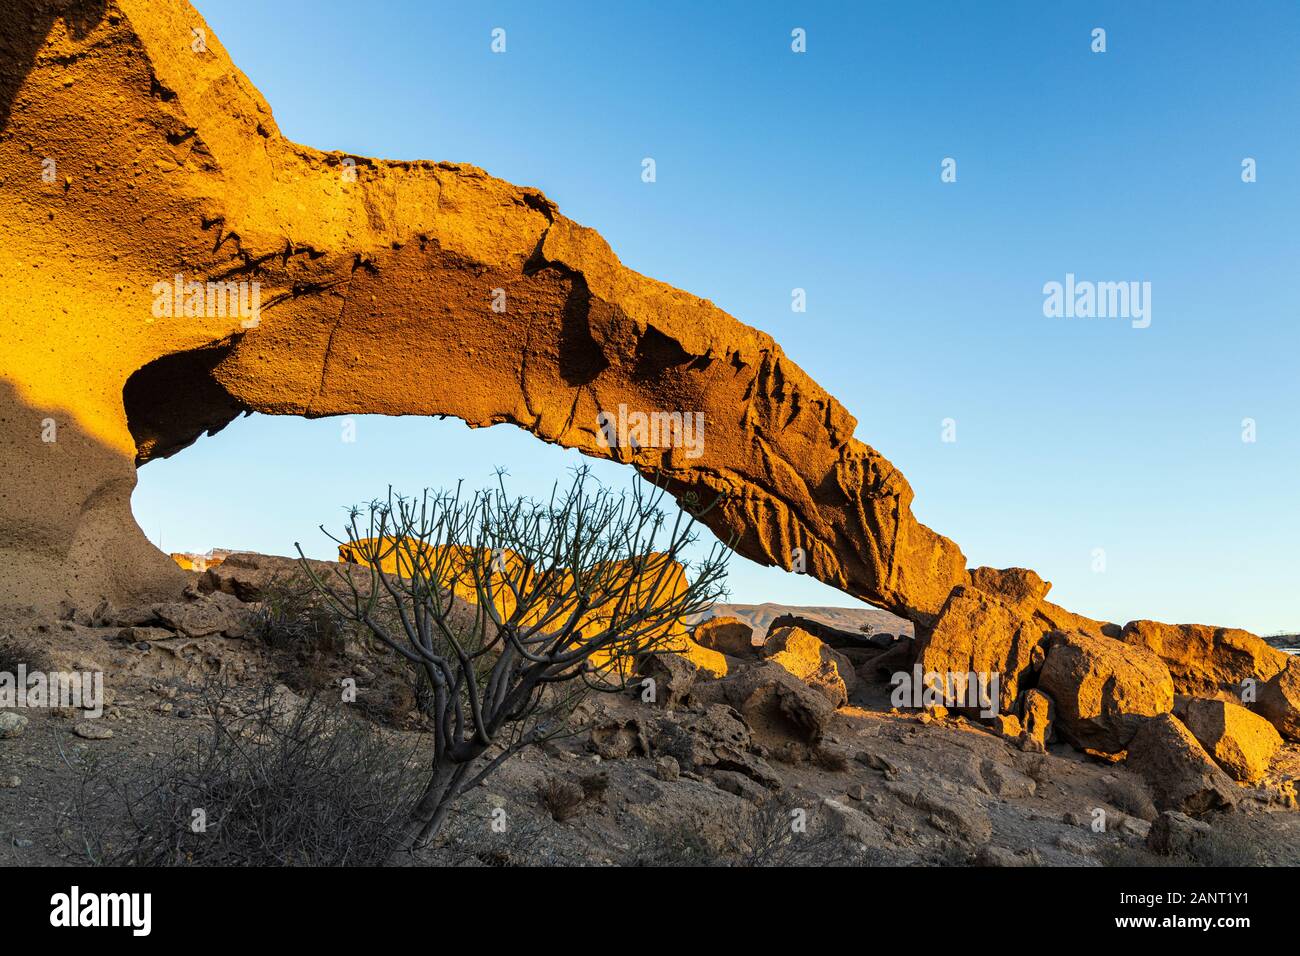 The arch of Tajao, remnants of a volcanic tube which has collapsed leaving behind a section forming this arch, San Miguel de Abona, Tenerife, Canary I Stock Photo